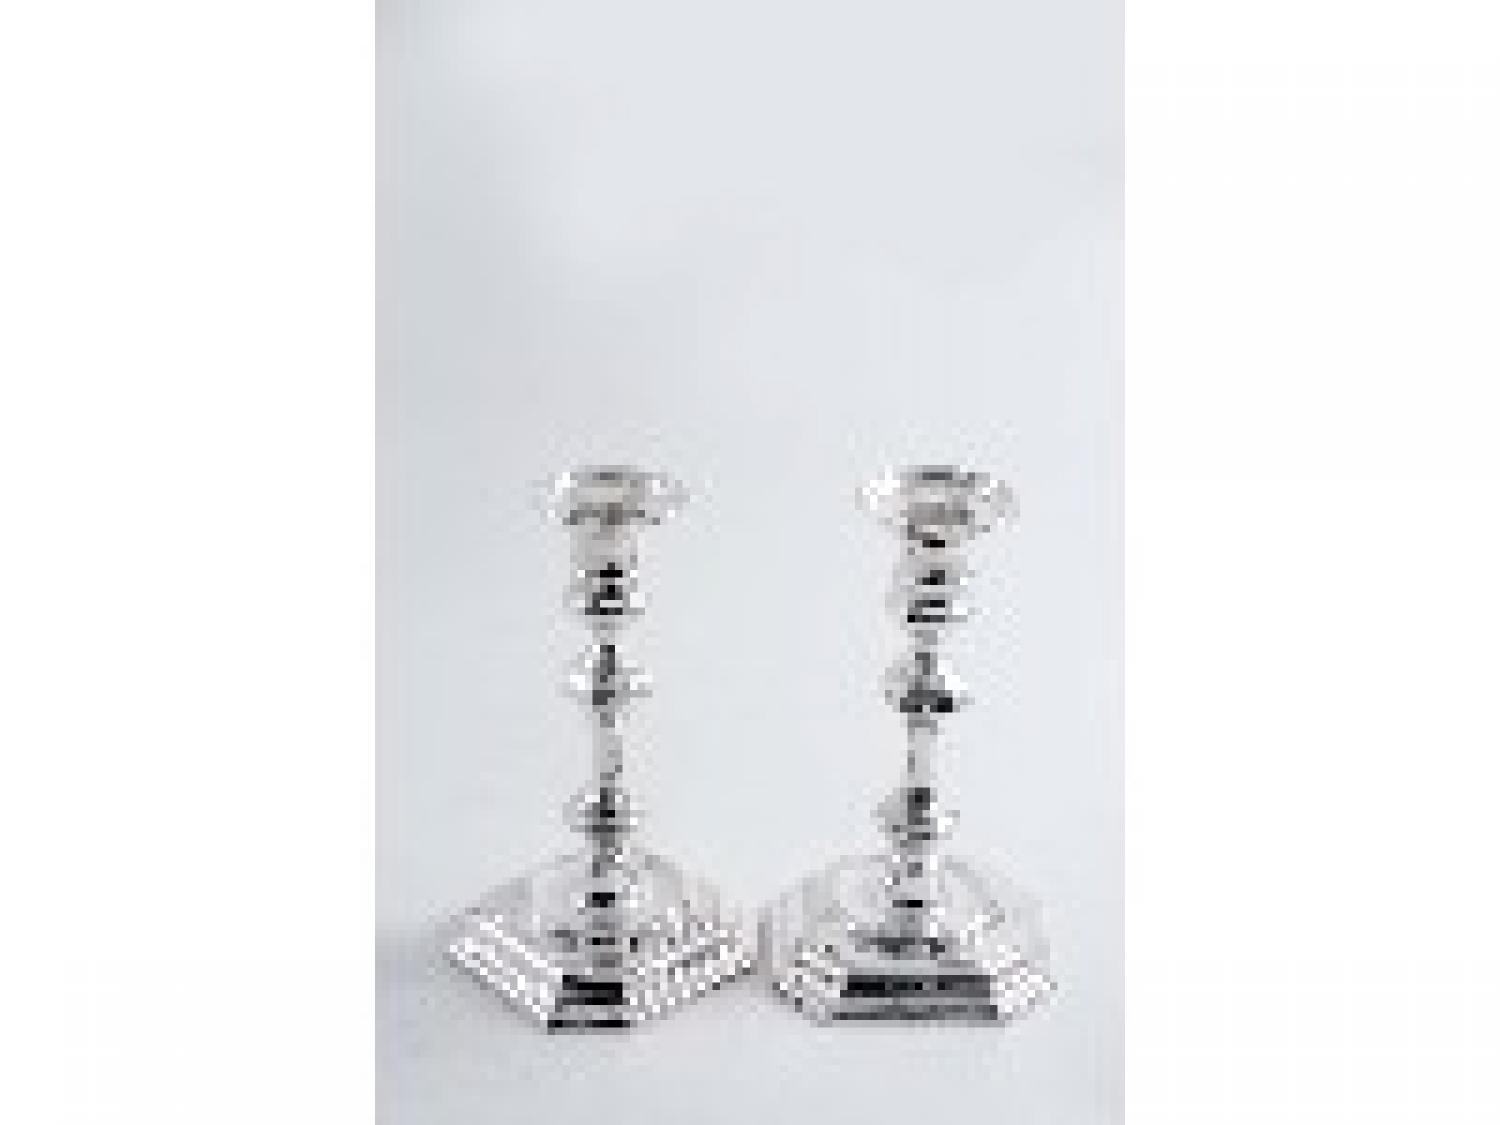 Pair of silver candle sticks